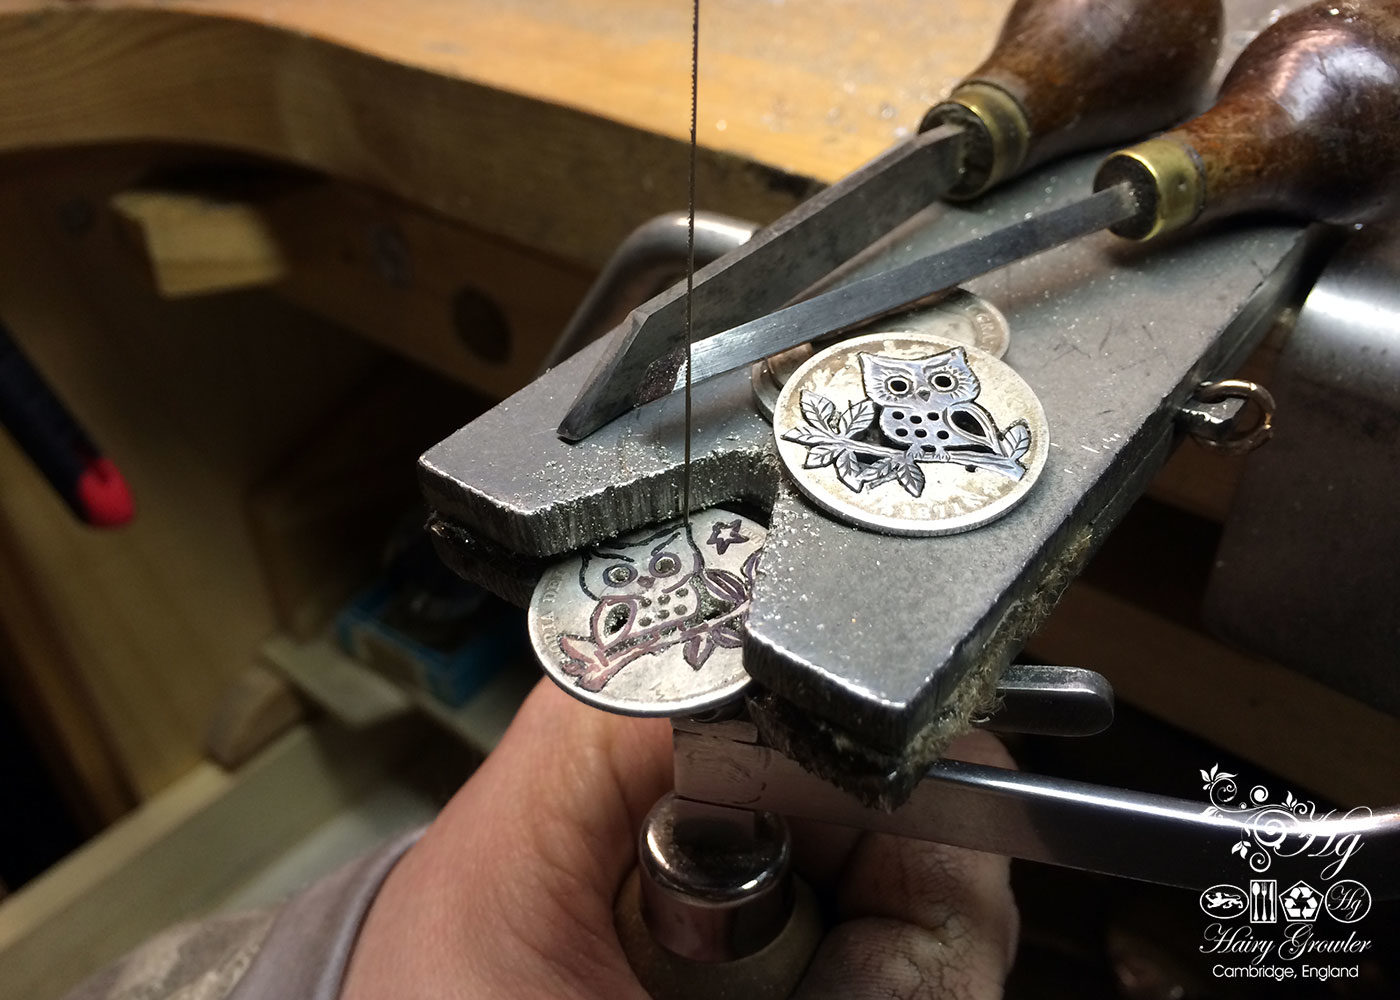 owl cufflinks handcrafted and recycled from sterling silver shillings and threepence coins